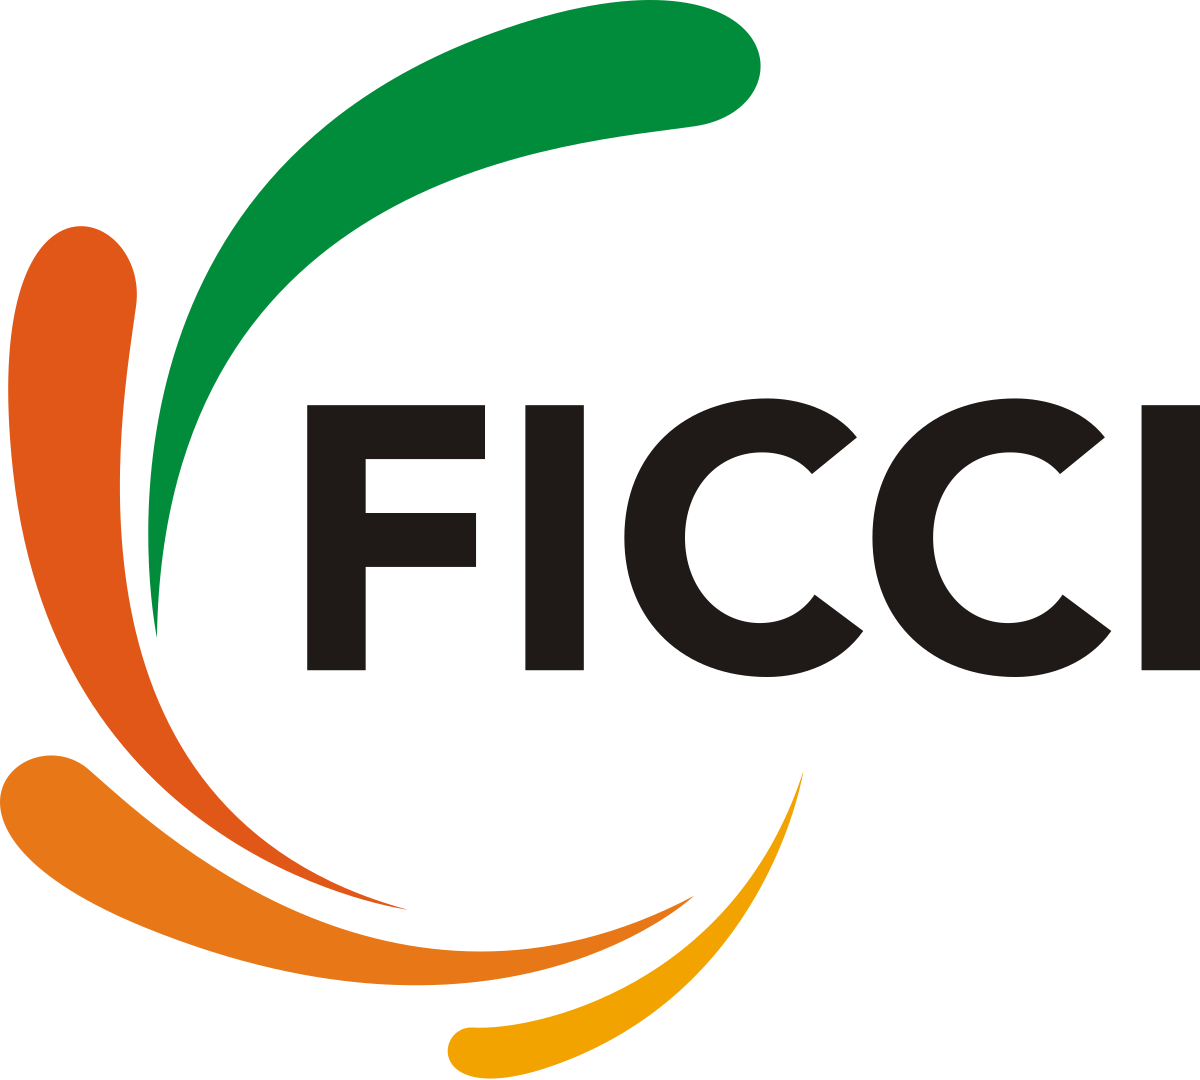 Non-Sugar Sweeteners in the Limelight: FICCI Seminar Dispels Myths and Uncovers the Health Advantages of Low-Calorie Sweeteners